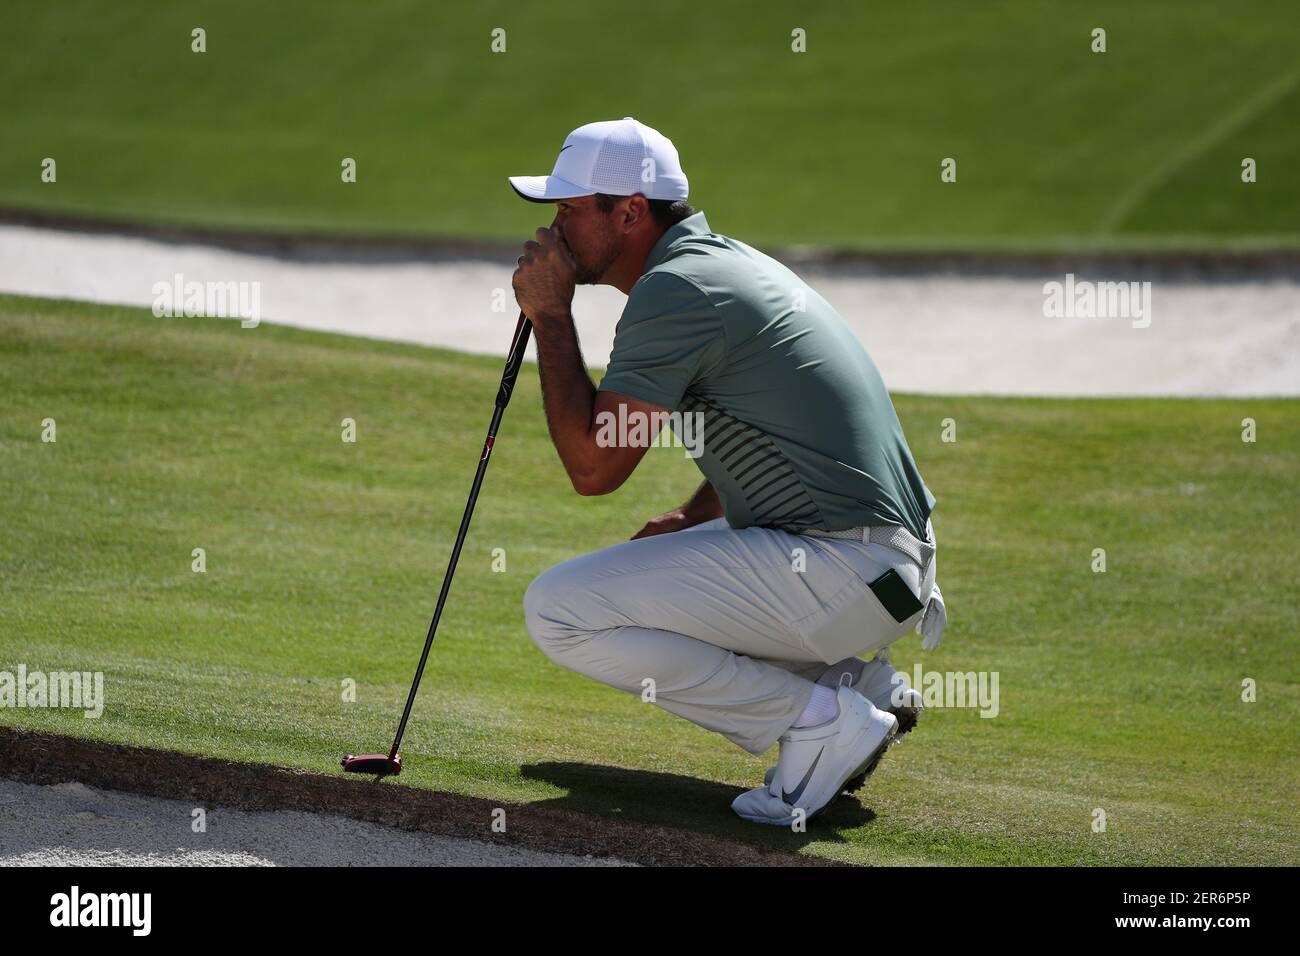 May 3, 2018; Charlotte, NC, USA; Jason Day during the first round of the Wells Fargo Championship golf tournament at Quail Hollow Club. Mandatory Credit: Jim Dedmon-USA TODAY Sports Stock Photo